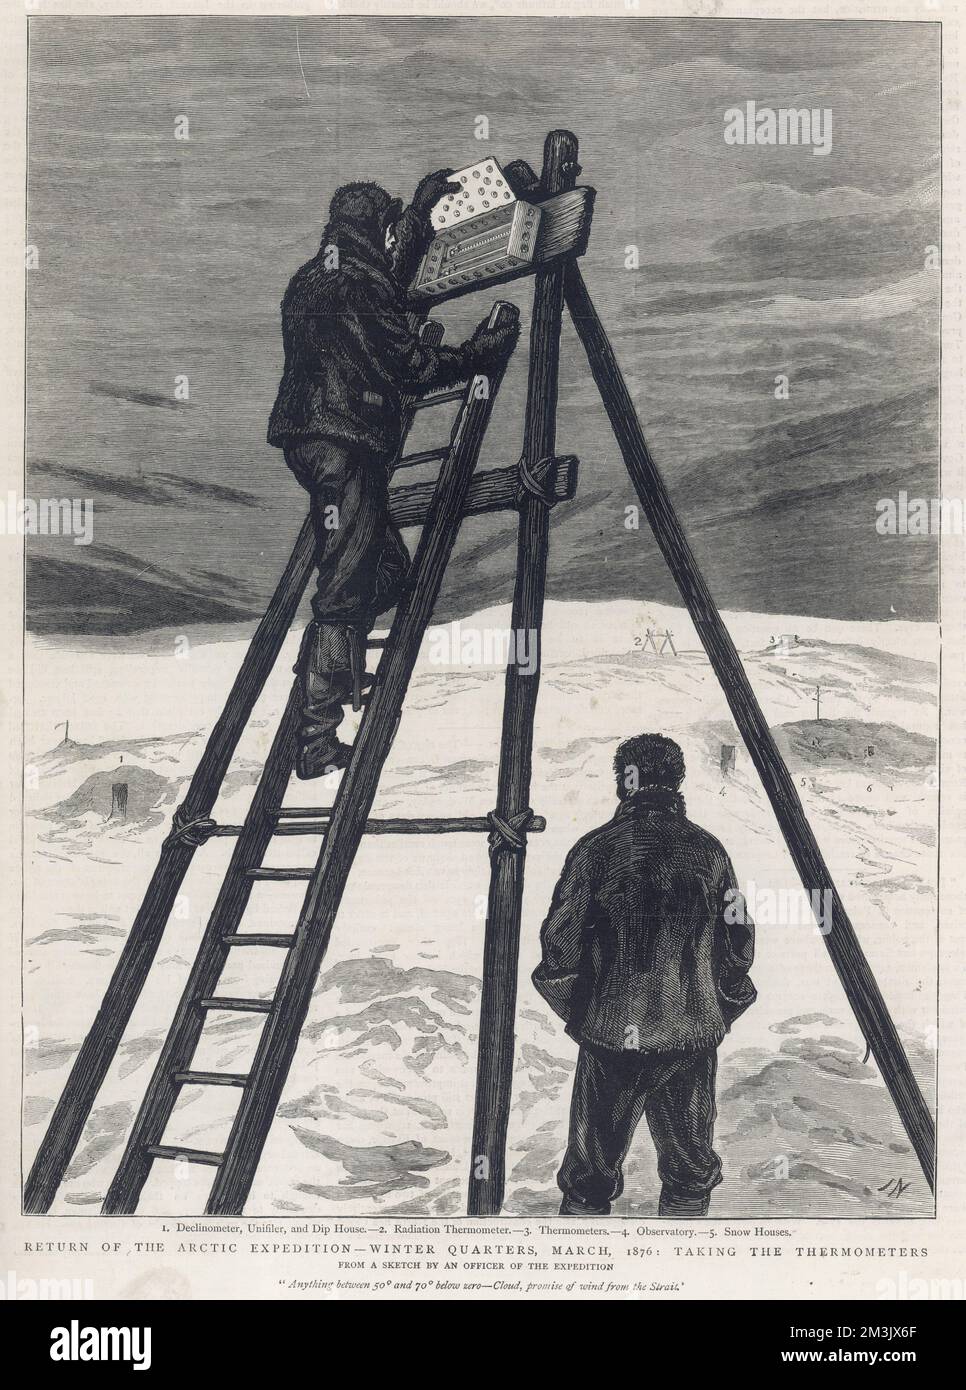 Two members of the British Arctic Expedition of 1875-1876 checking the thermometers used at their Winter Quarters.    In 1875 the British Admiralty sent Captain George Nares with two ships, HMS 'Alert' and HMS 'Discovery', to make an attempt to reach the North Pole via Smith Sound.  The attempt was unsuccessful, but a new 'furthest North' record was set and the coasts of Greenland and Ellesmere Island charted.      Scientific observations were taken by the crews of both ships; 'Discovery' had winter quarters at Lady Franklin Bay, whilst 'Alert' wintered 50 miles away at Floeberg Beach.     Dat Stock Photo